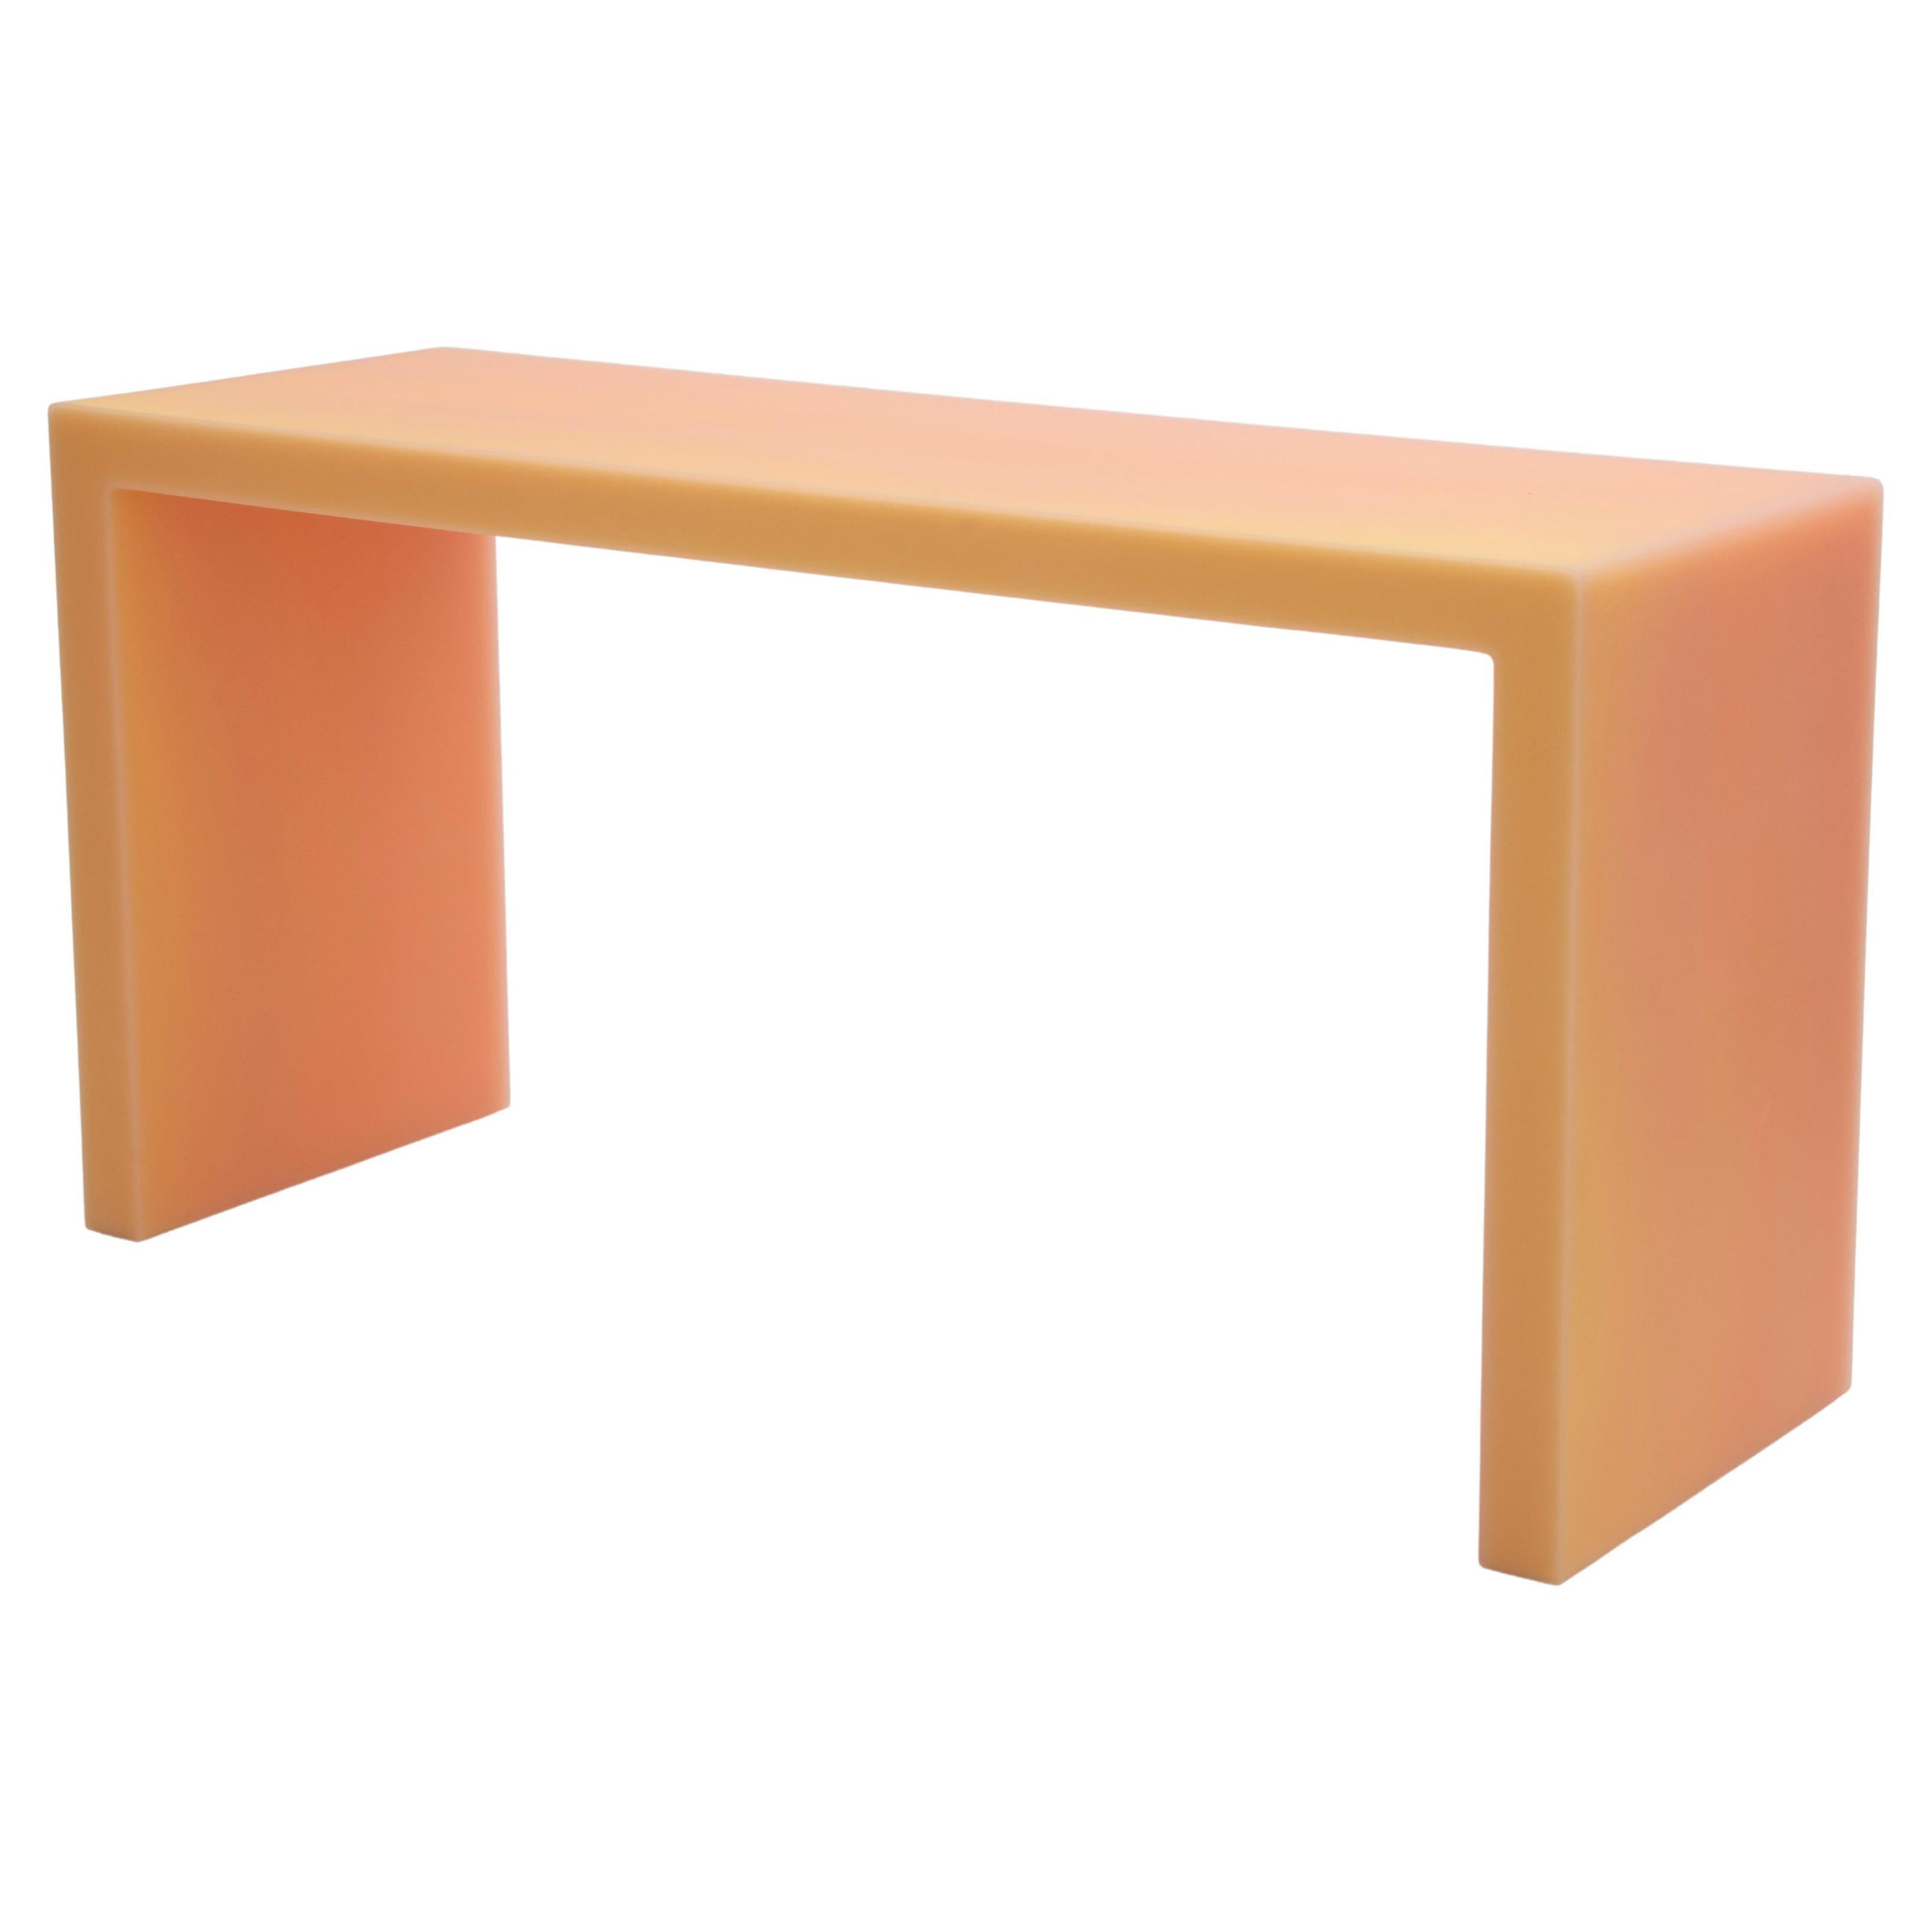 Meld Resin Desk/Console Table in Peach by Facture, REP by Tuleste Factory For Sale